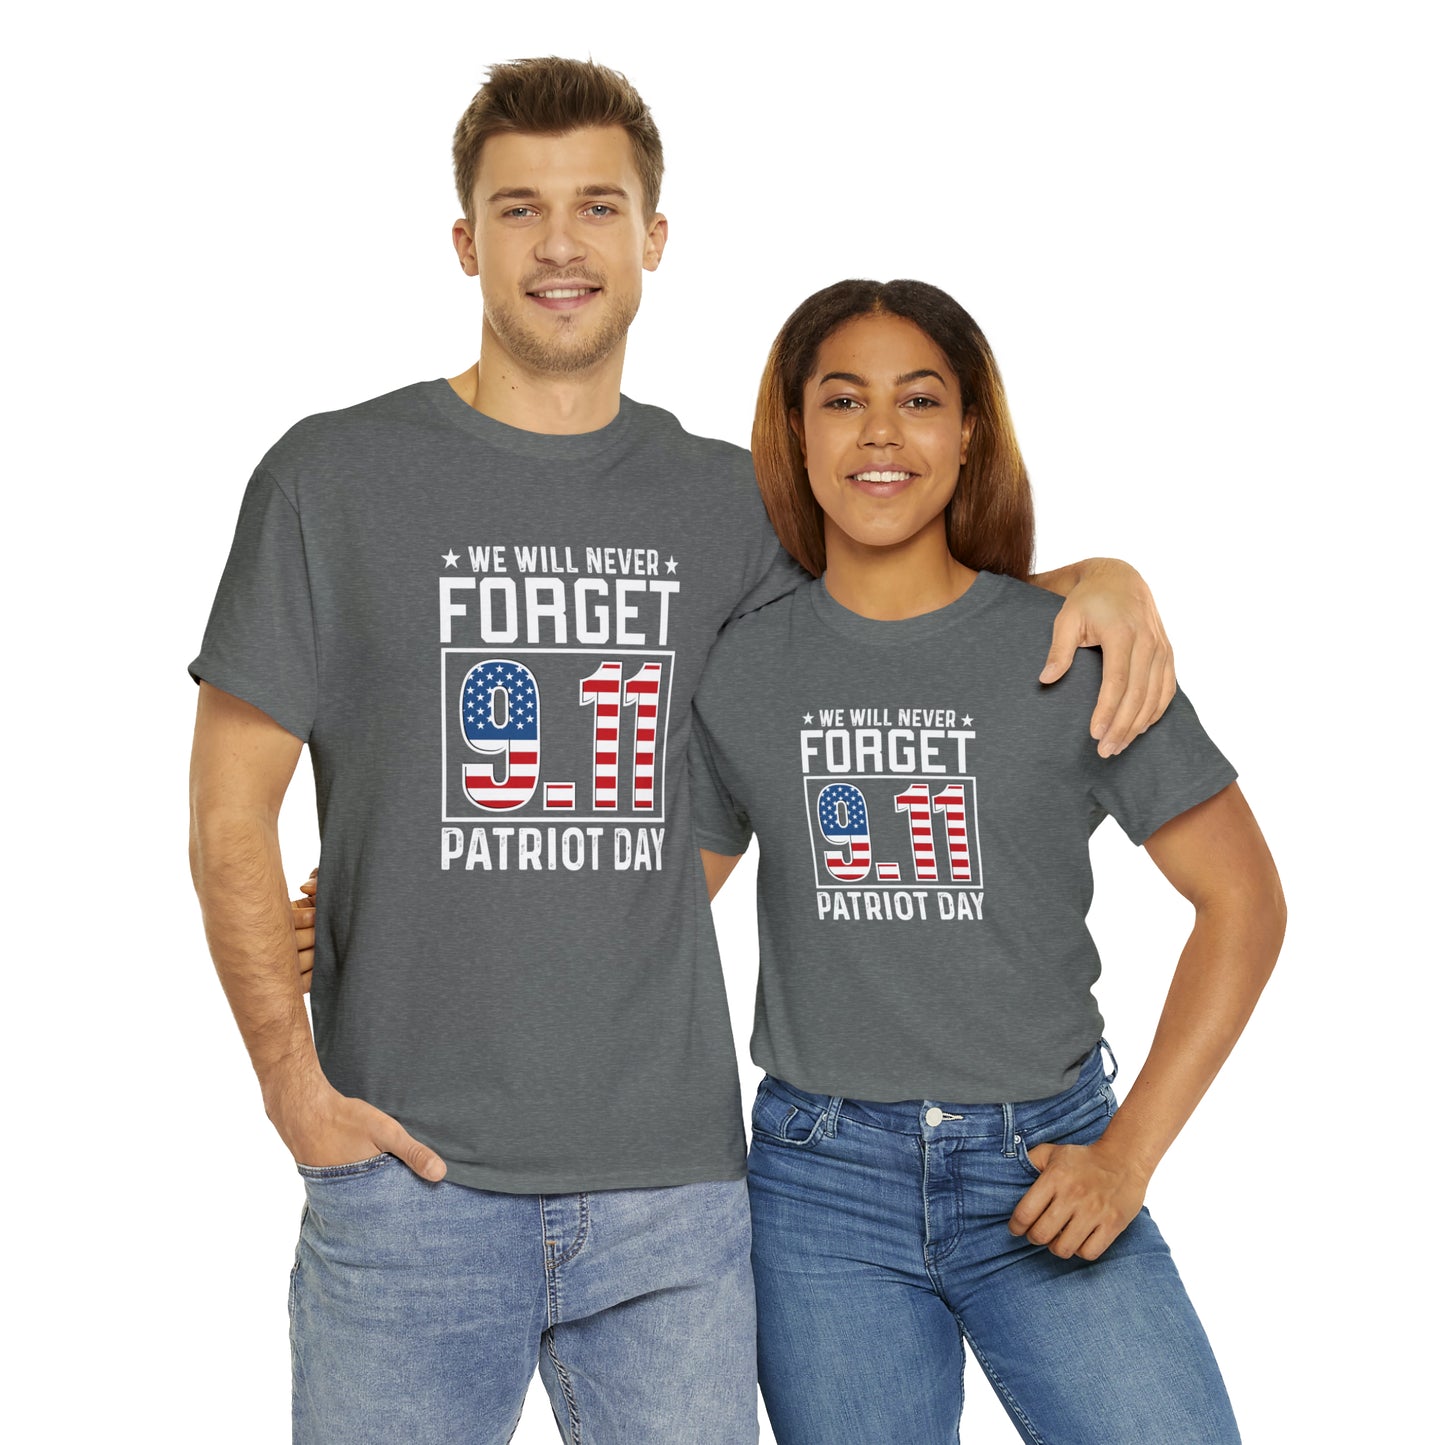 Patriot Day T-Shirt For 9 11 T Shirt For Never Forget TShirt For Patriotic Tee For Conservative Shirt